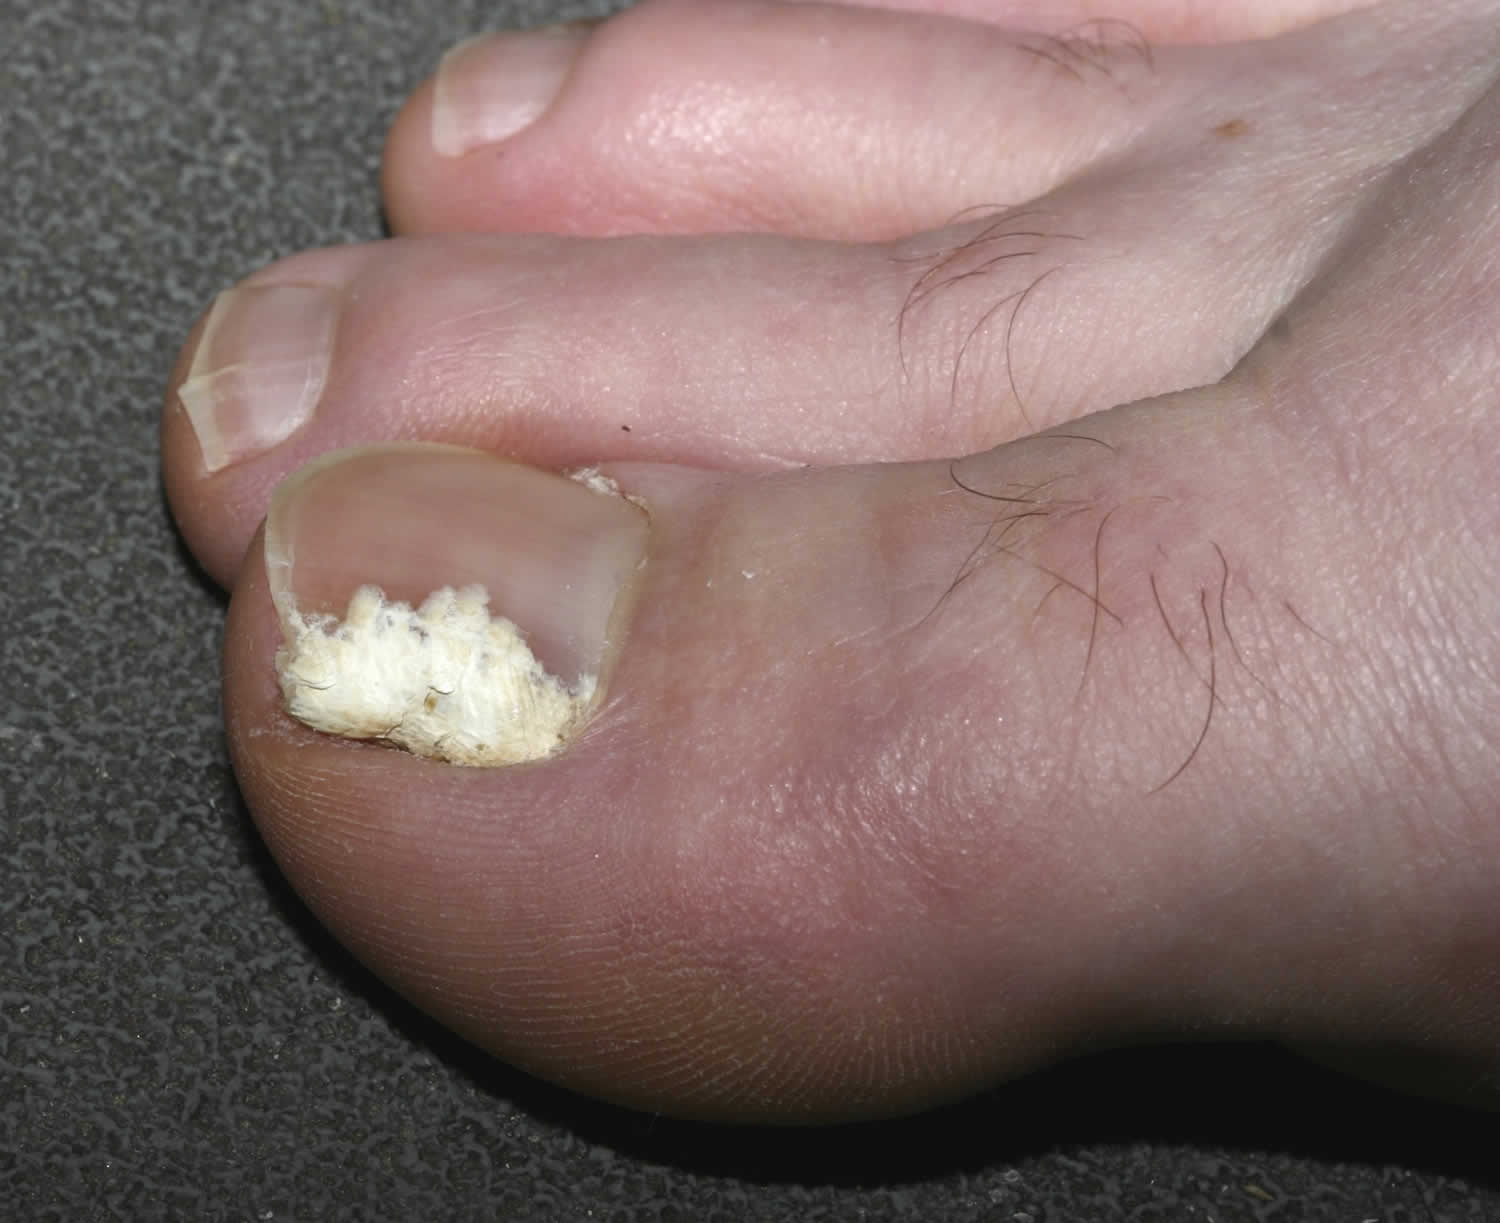 Nail fungus infection, causes and how to get rid of nail fungus infection